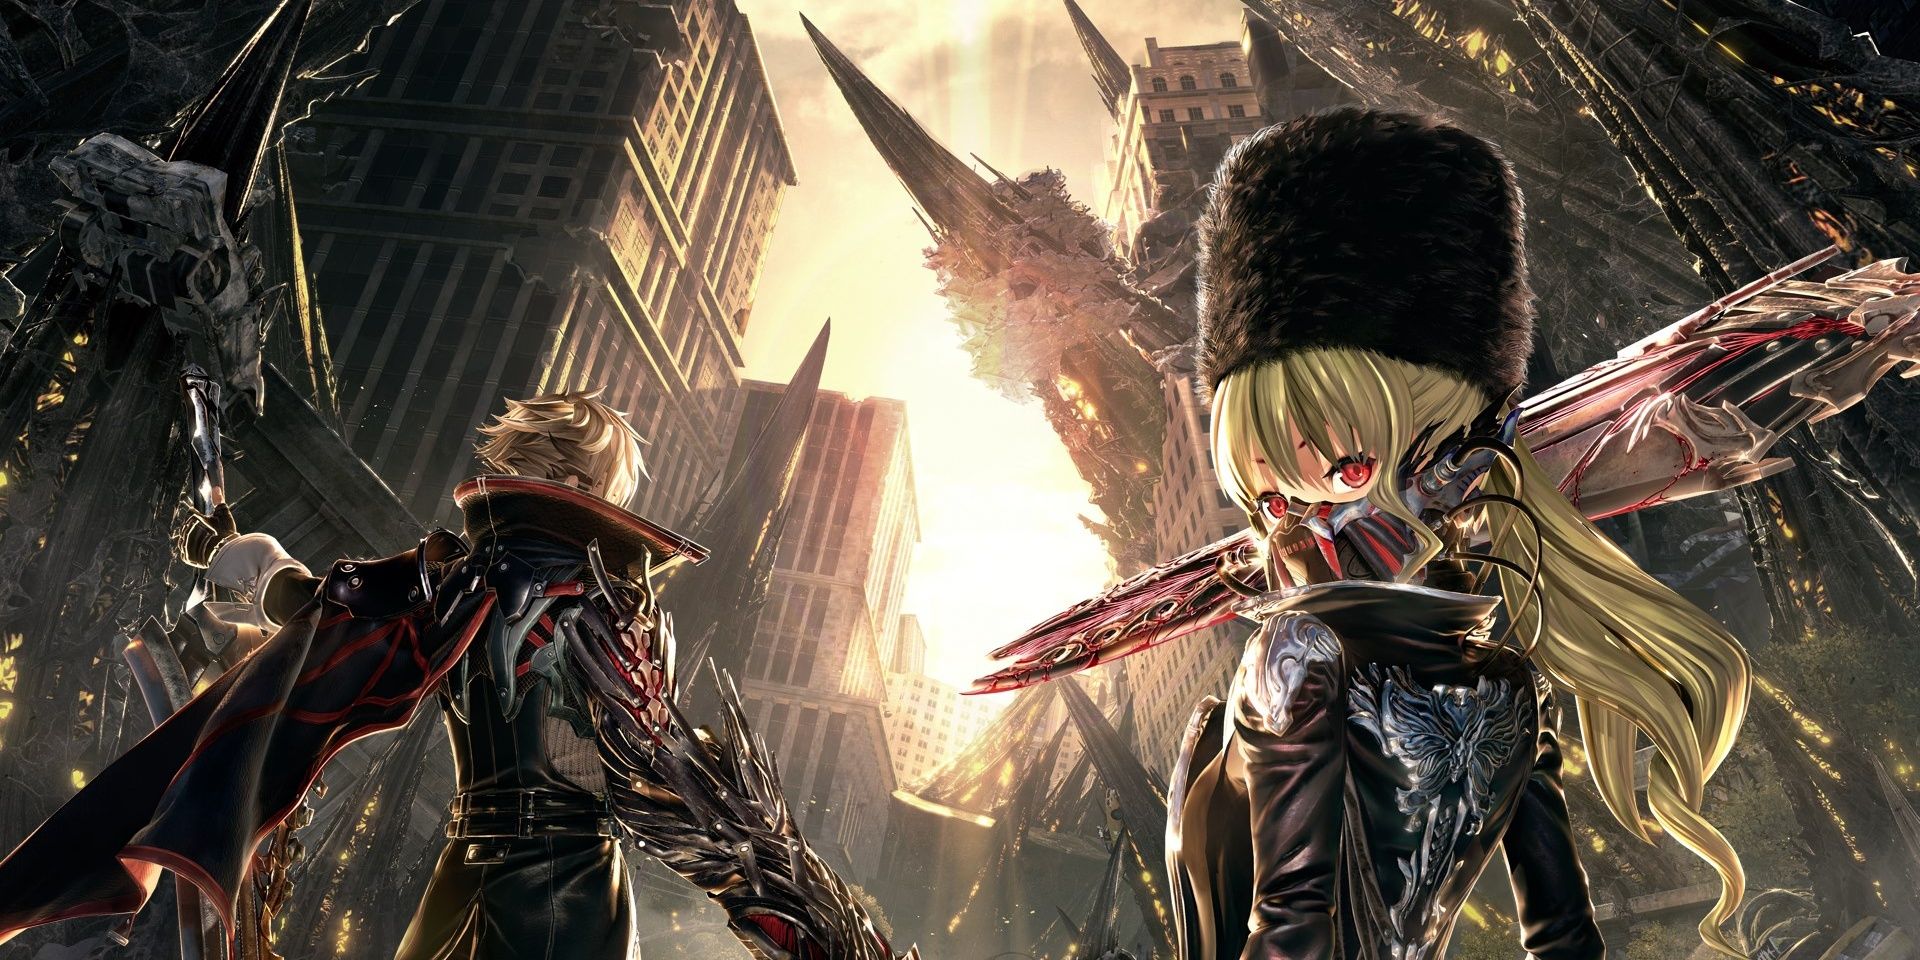 2 Code vein characters in a promo image